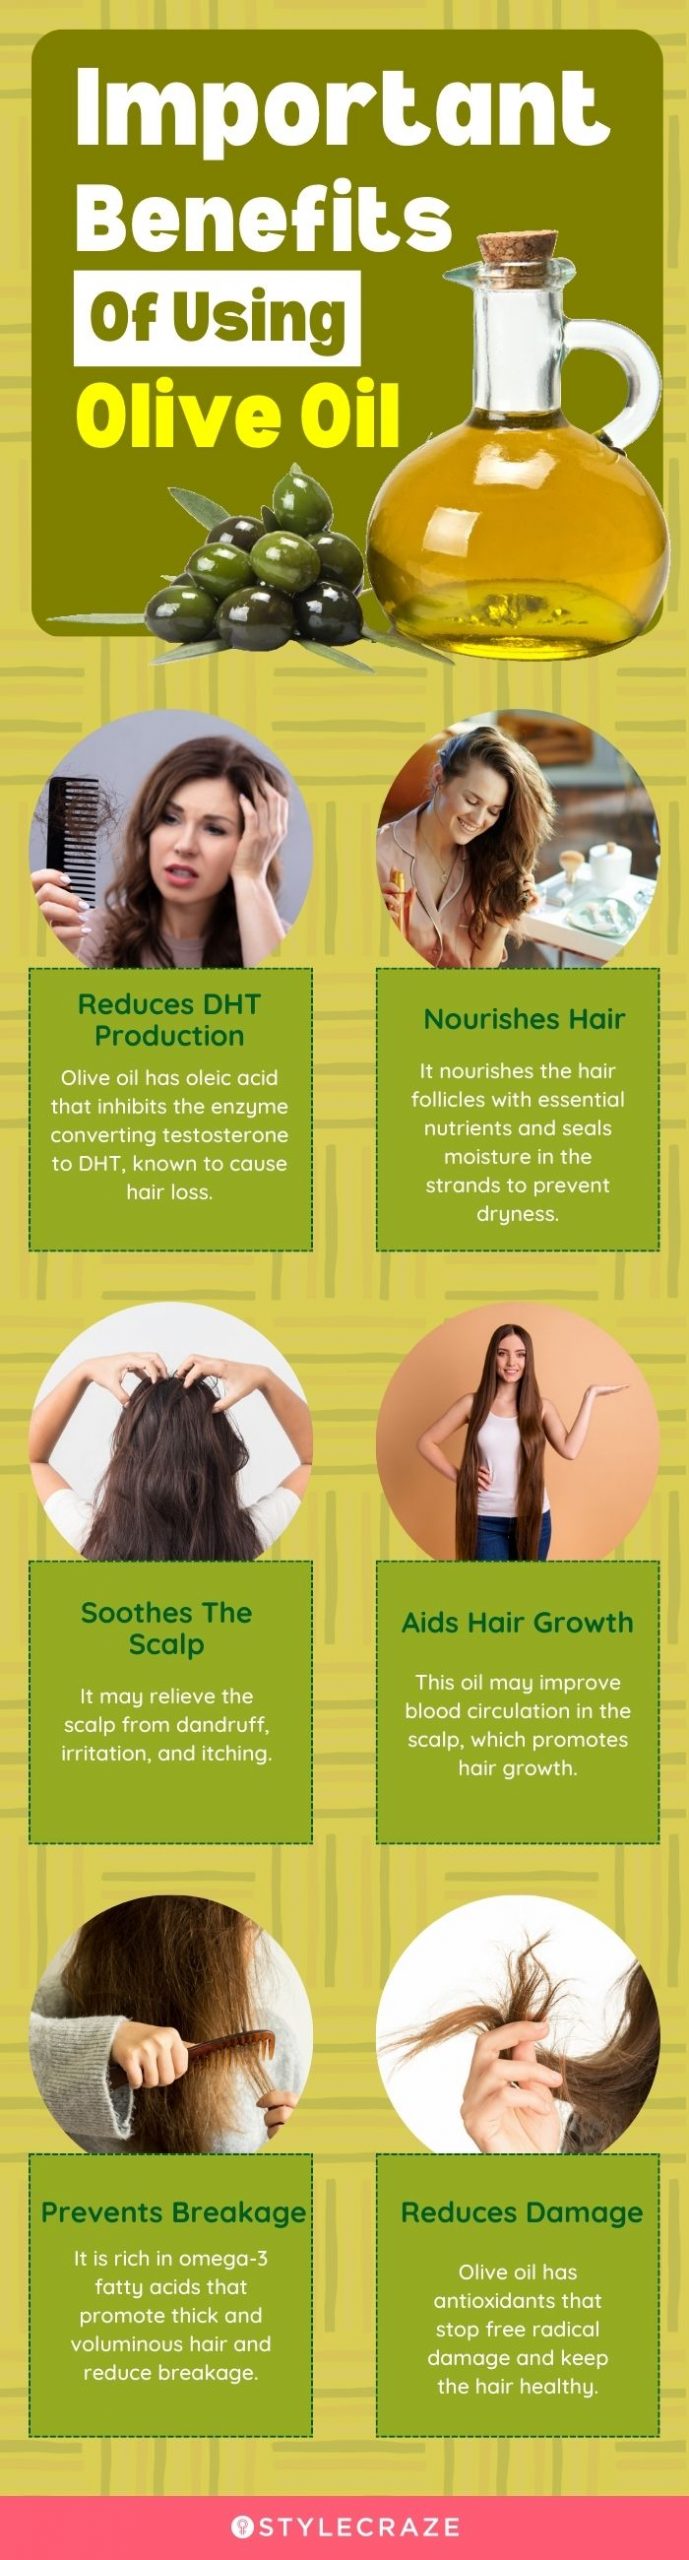 Olive Oil For Hair 5 Benefits And How To Use It The Best Way